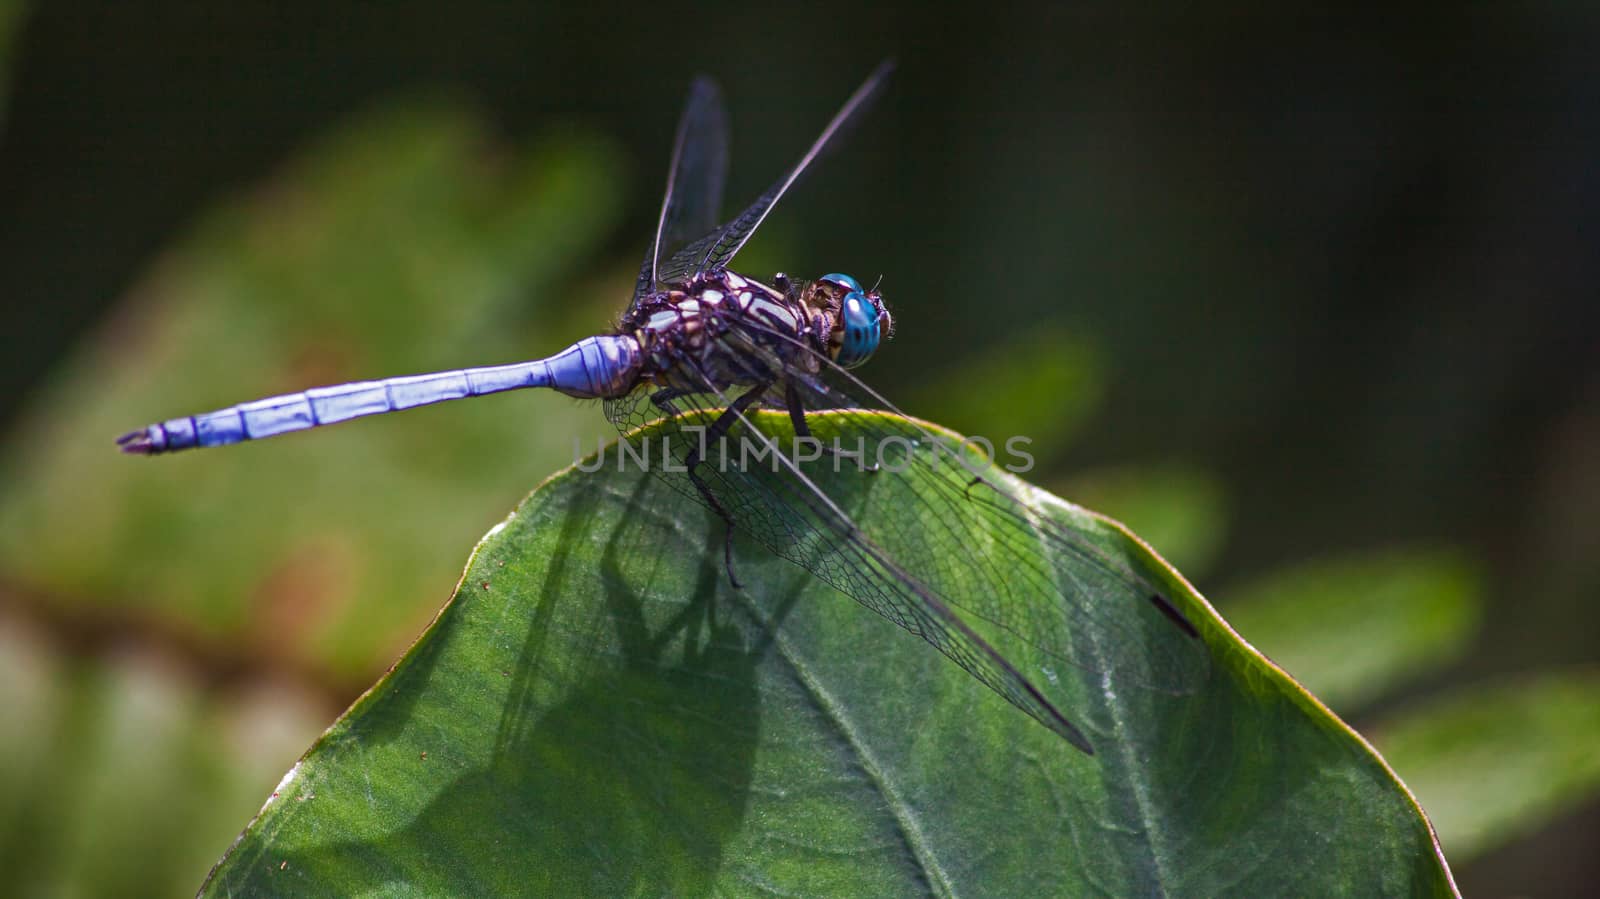 Blue Dragonfly Macro by kobus_peche